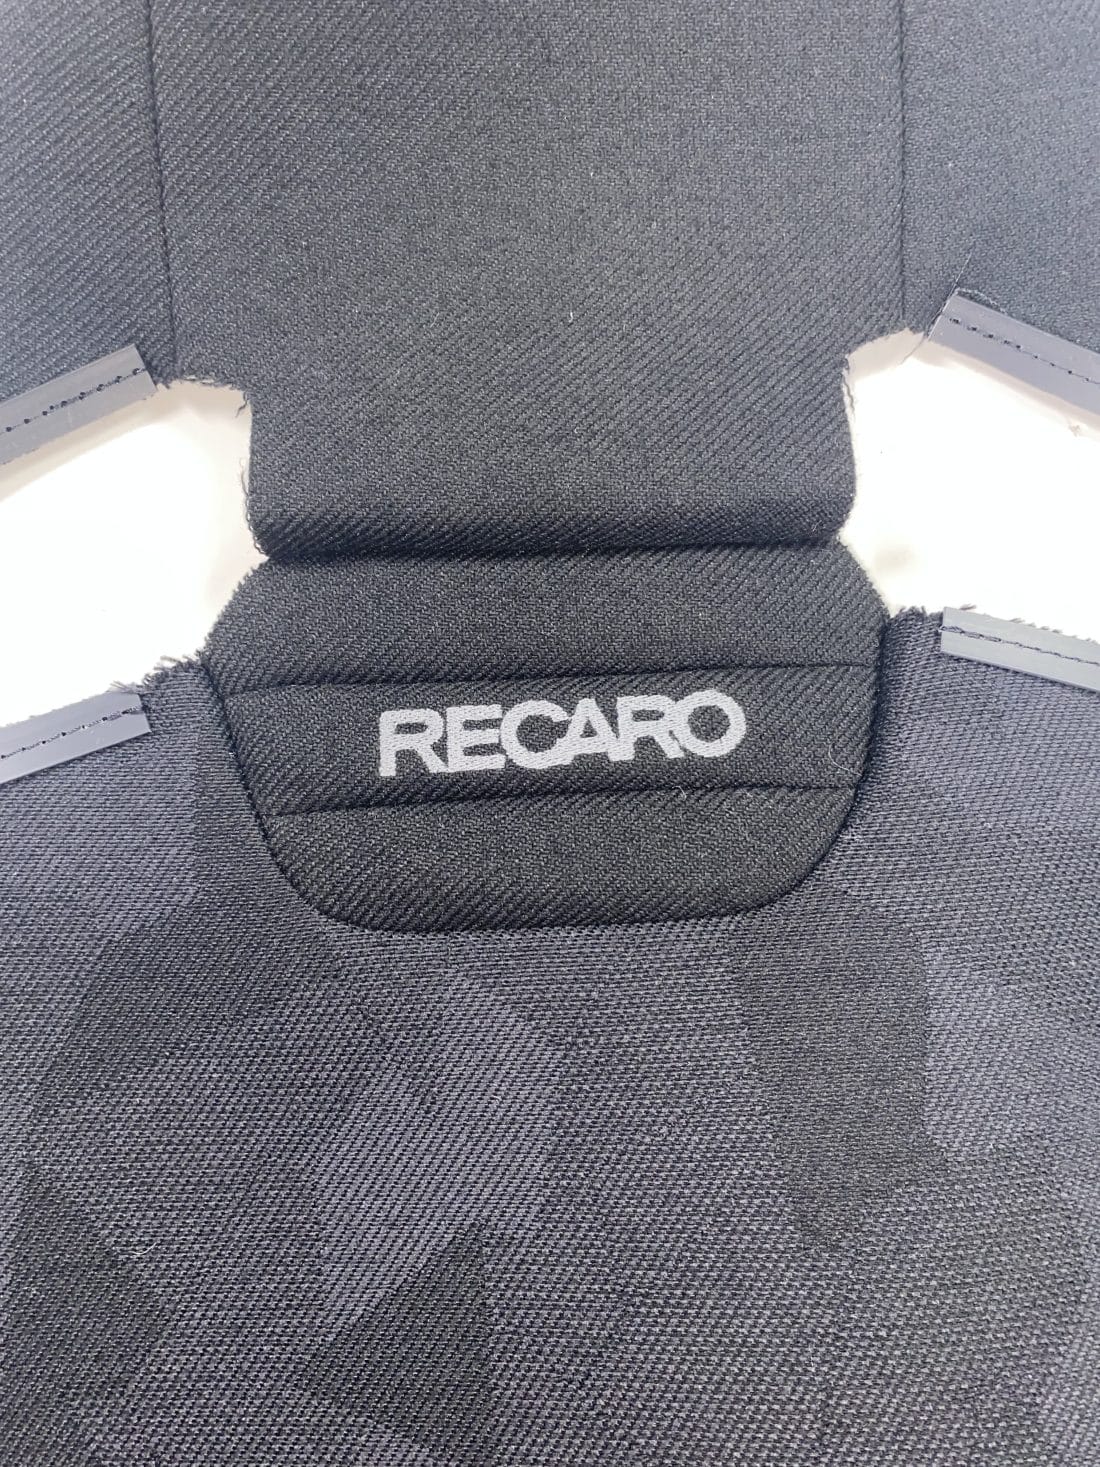 Trp Post Container Data Trp Post Id 9828 Recaro Cross Sportster Cs Upholstery Set Backrest Right Trp Post Container